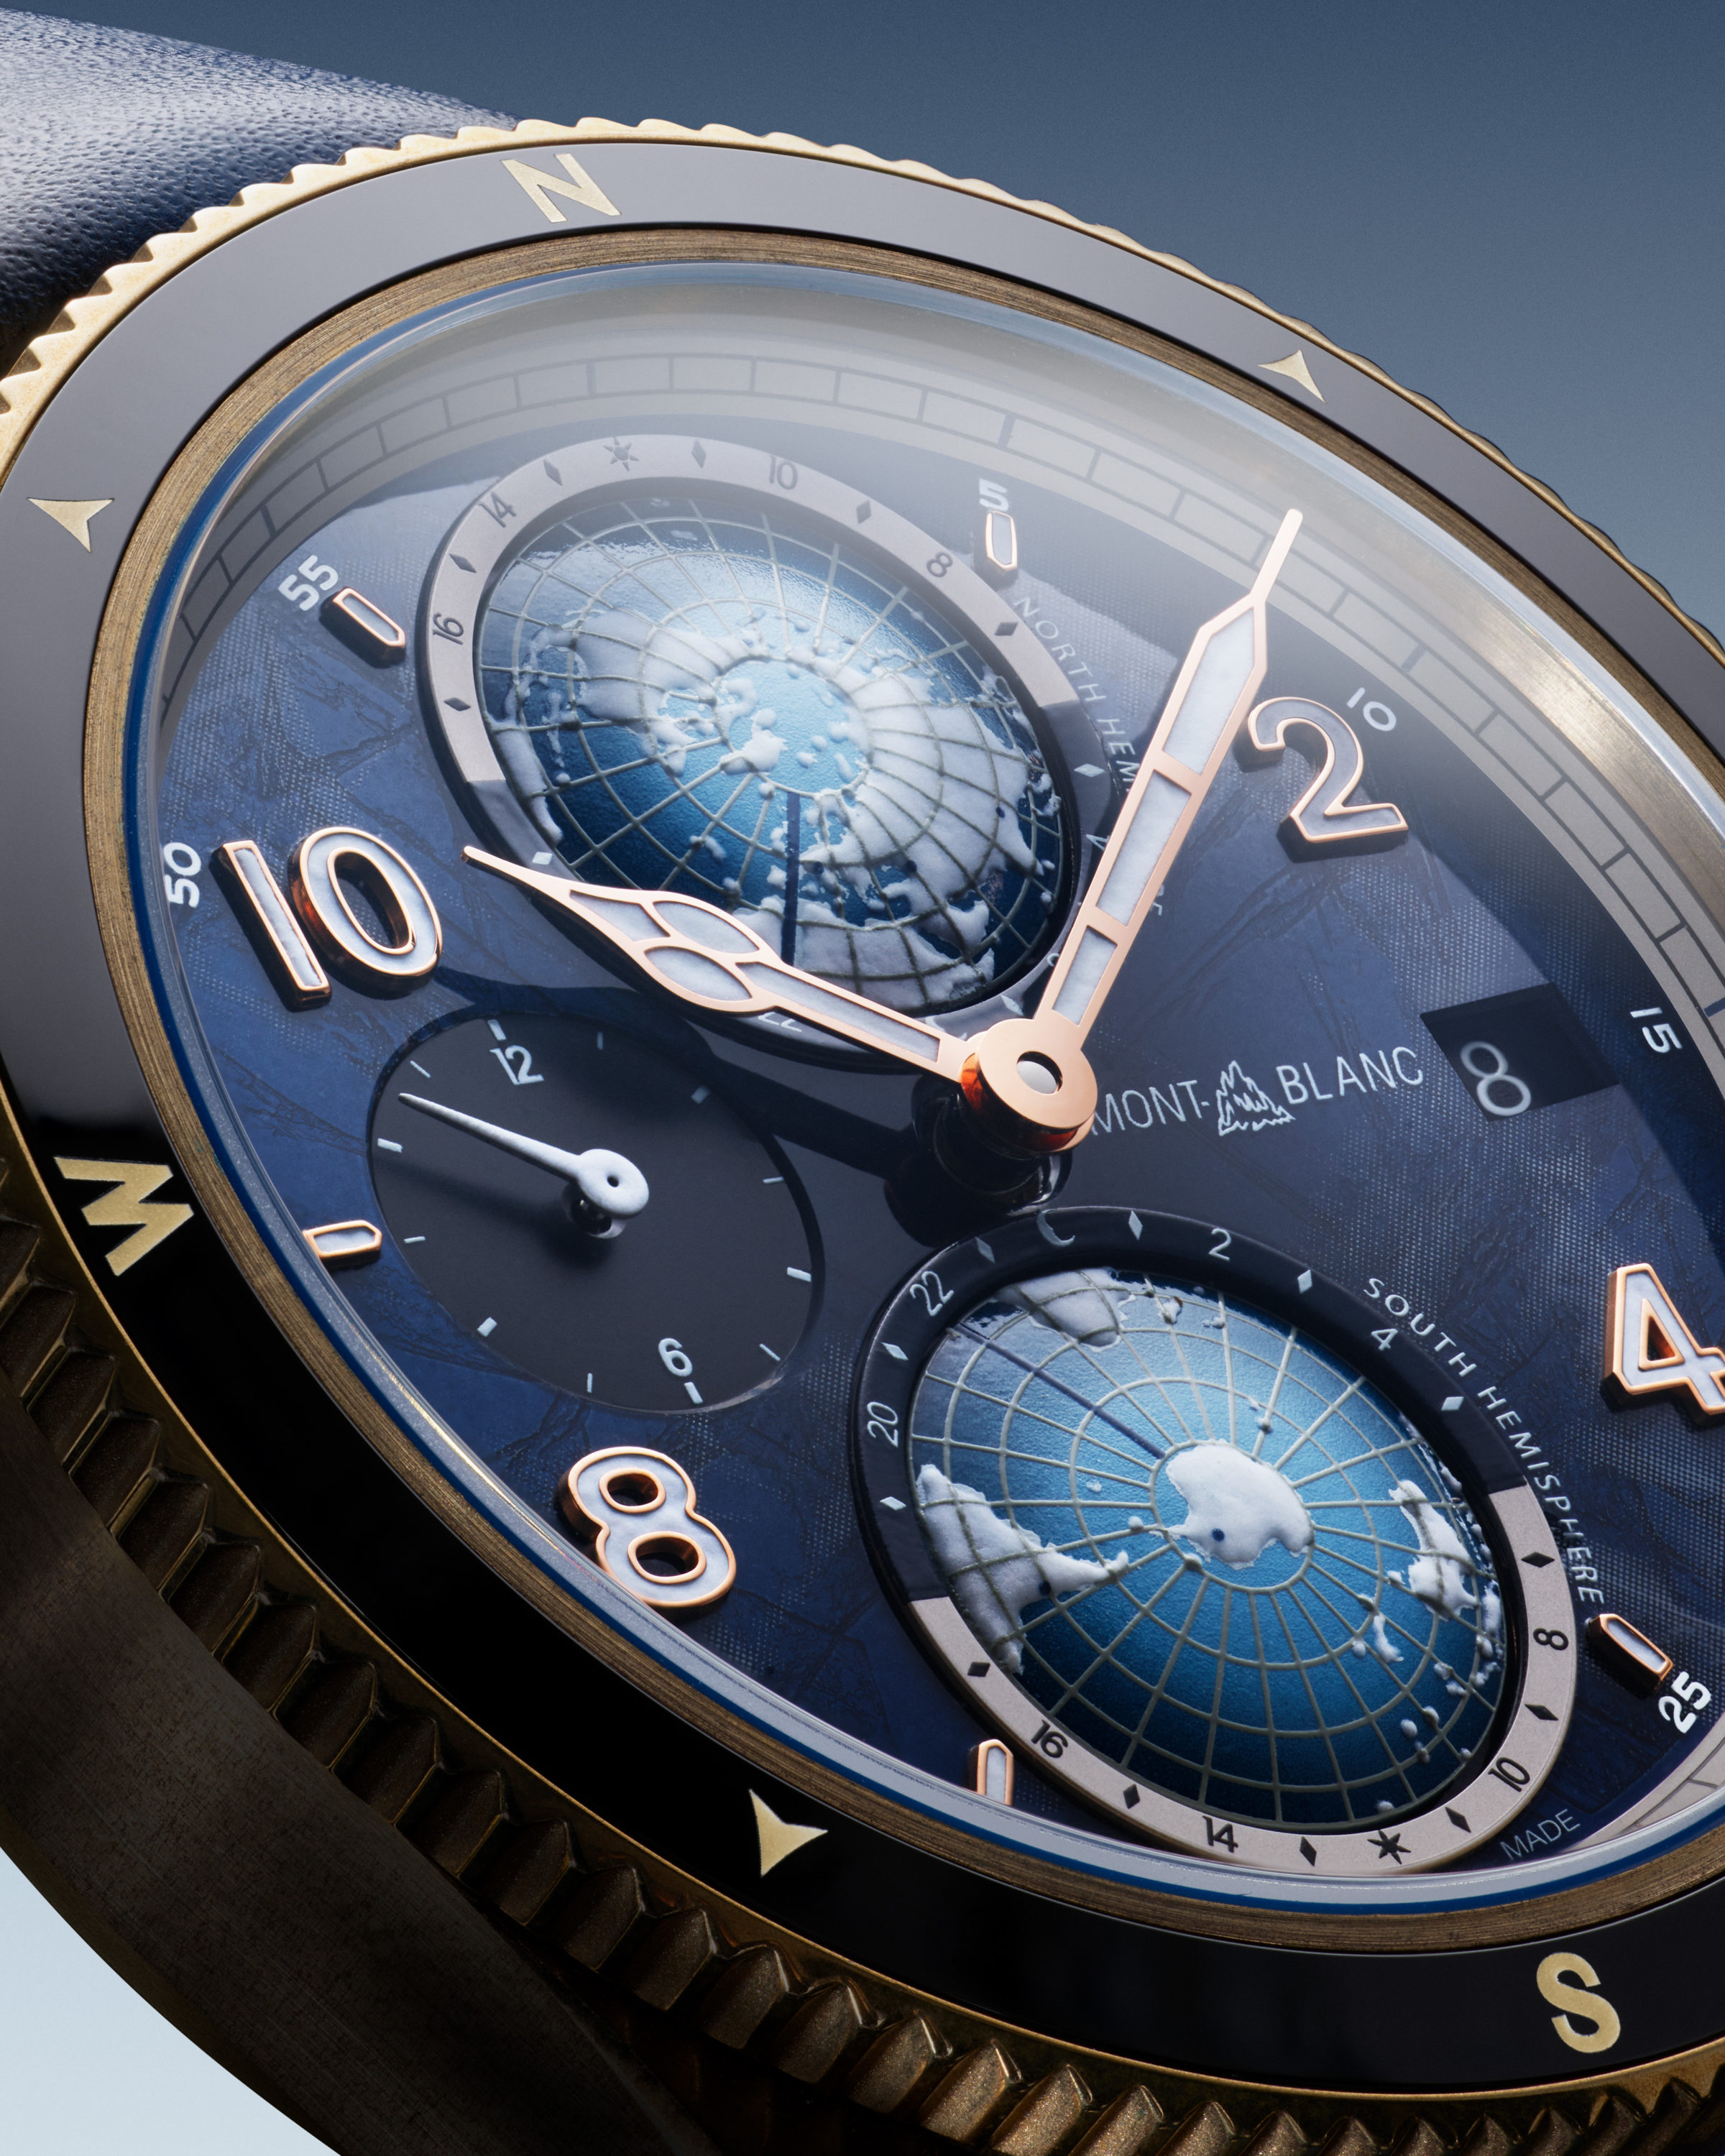 Showing at WatchTime New York 2022: Montblanc Geosphere 0 Oxygen